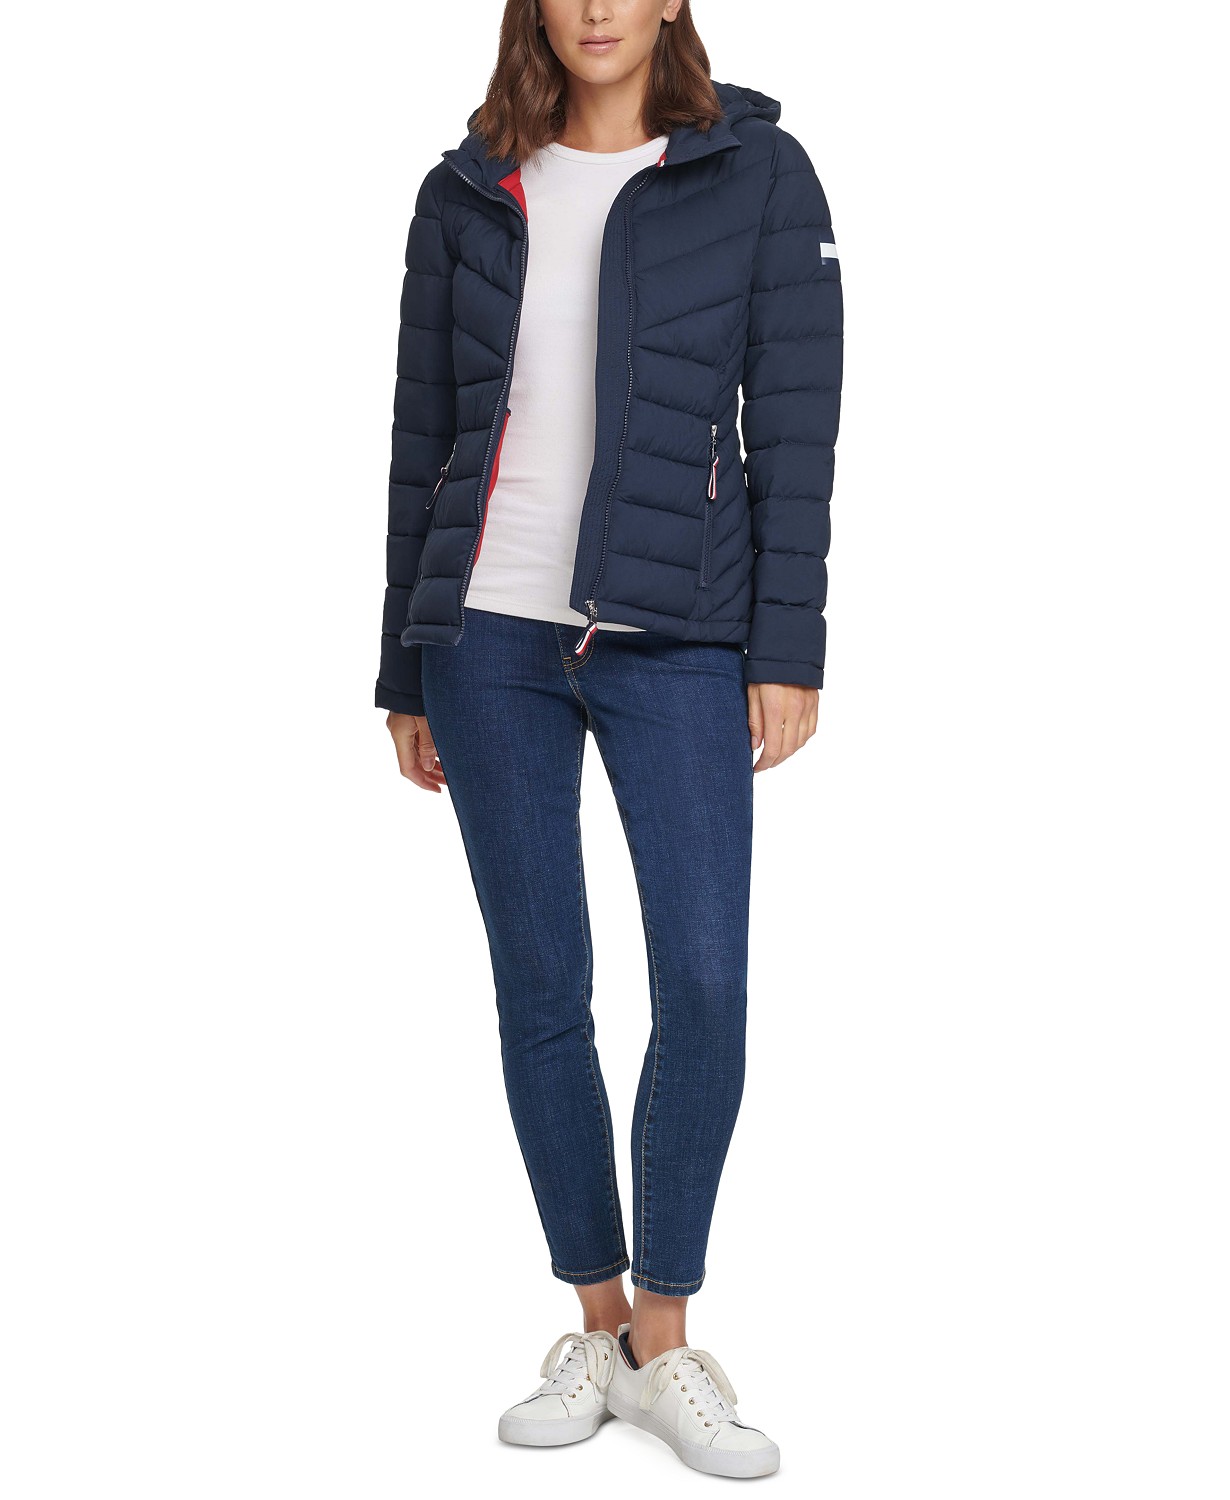 woocommerce-673321-2209615.cloudwaysapps.com-tommy-hilfiger-womens-blue-hooded-packable-puffer-coat-jacket